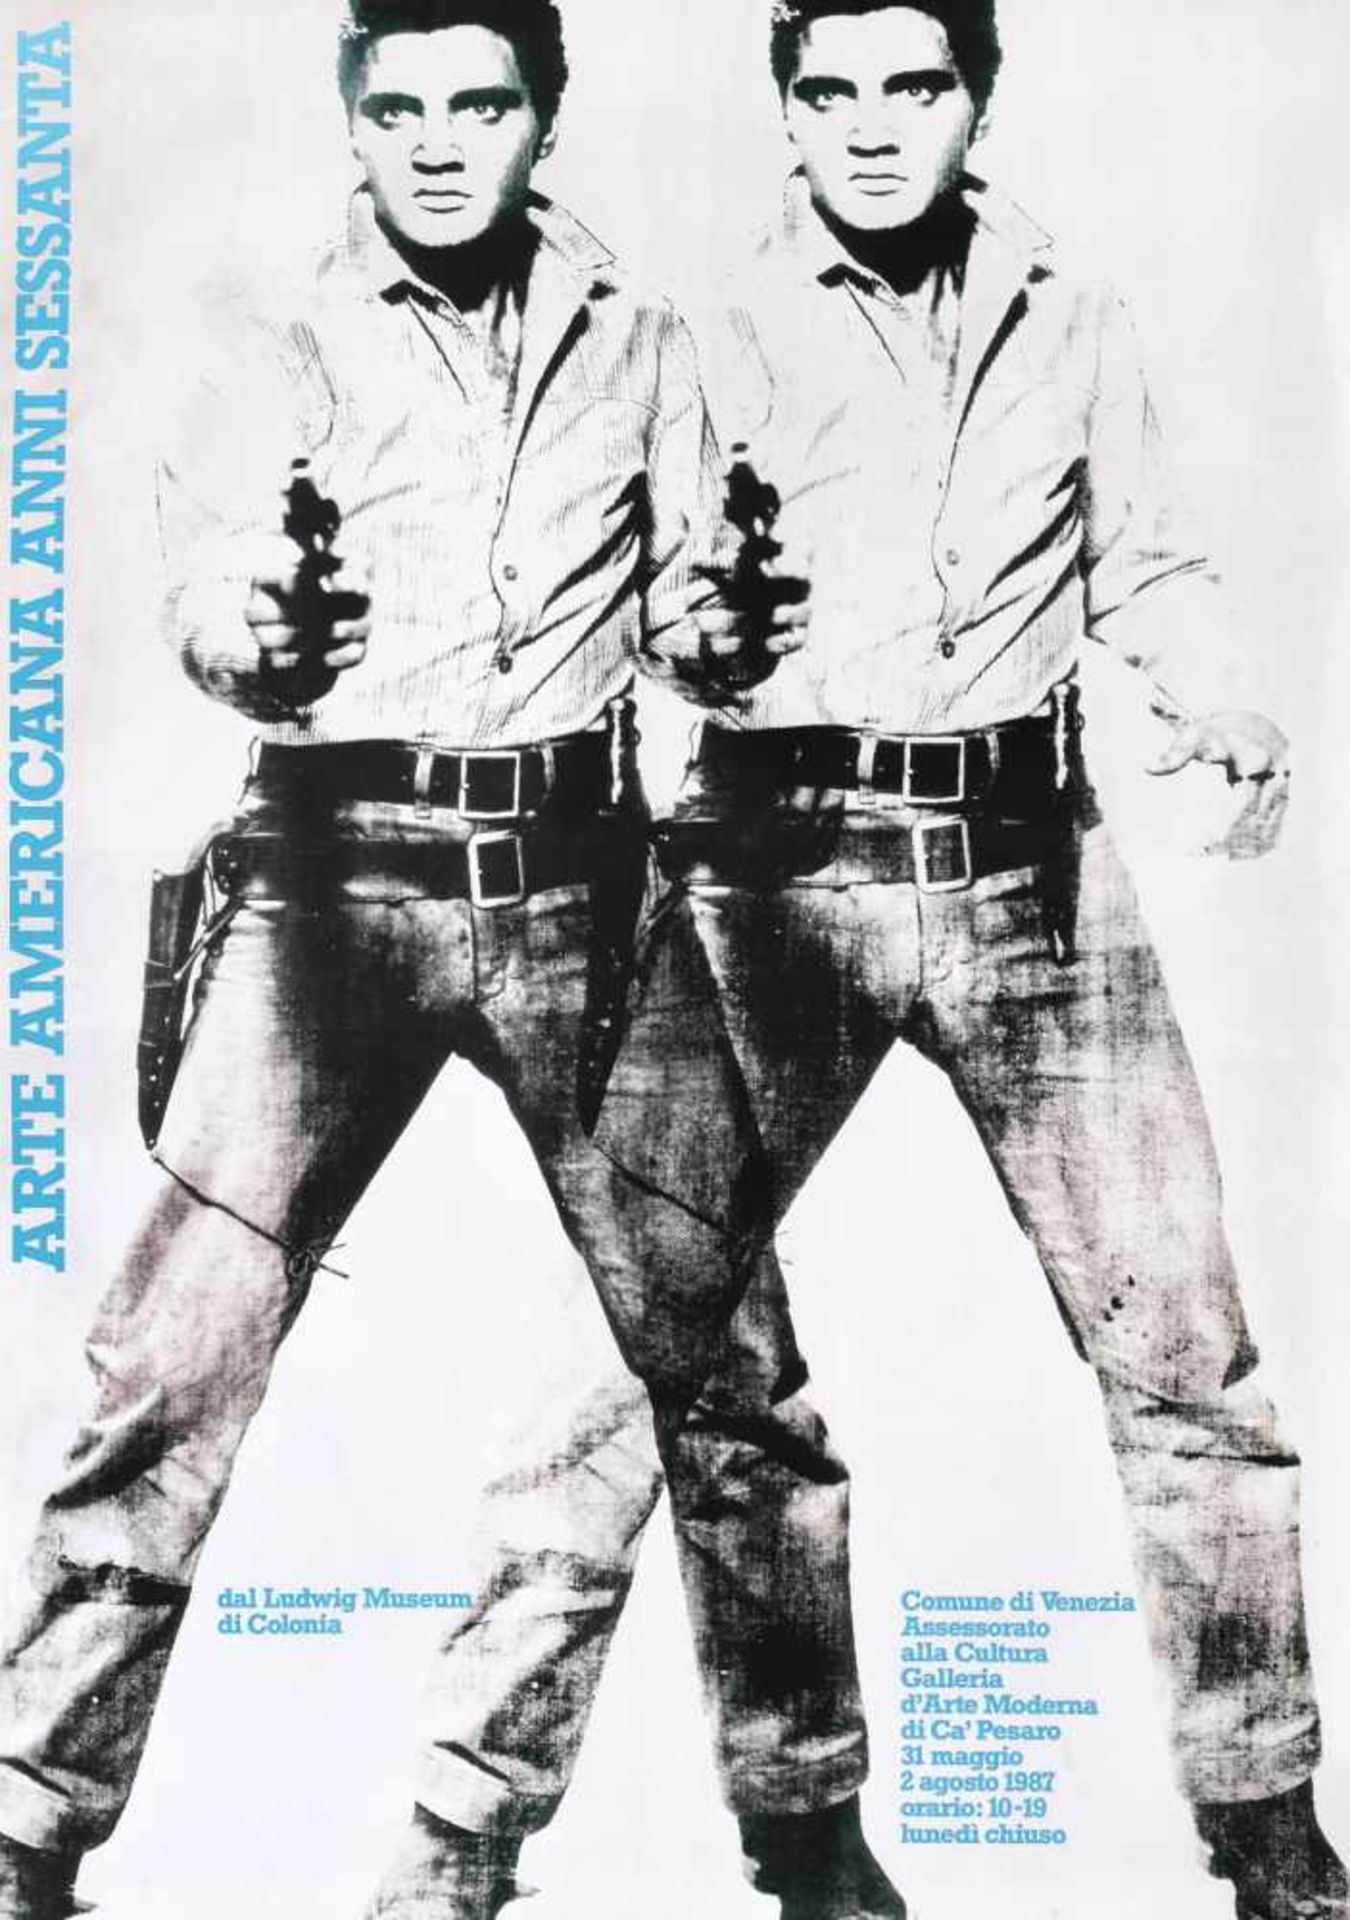 "American Art of the Sixties", exhibition poster, Italy, 31st of March - 2nd of August 1987